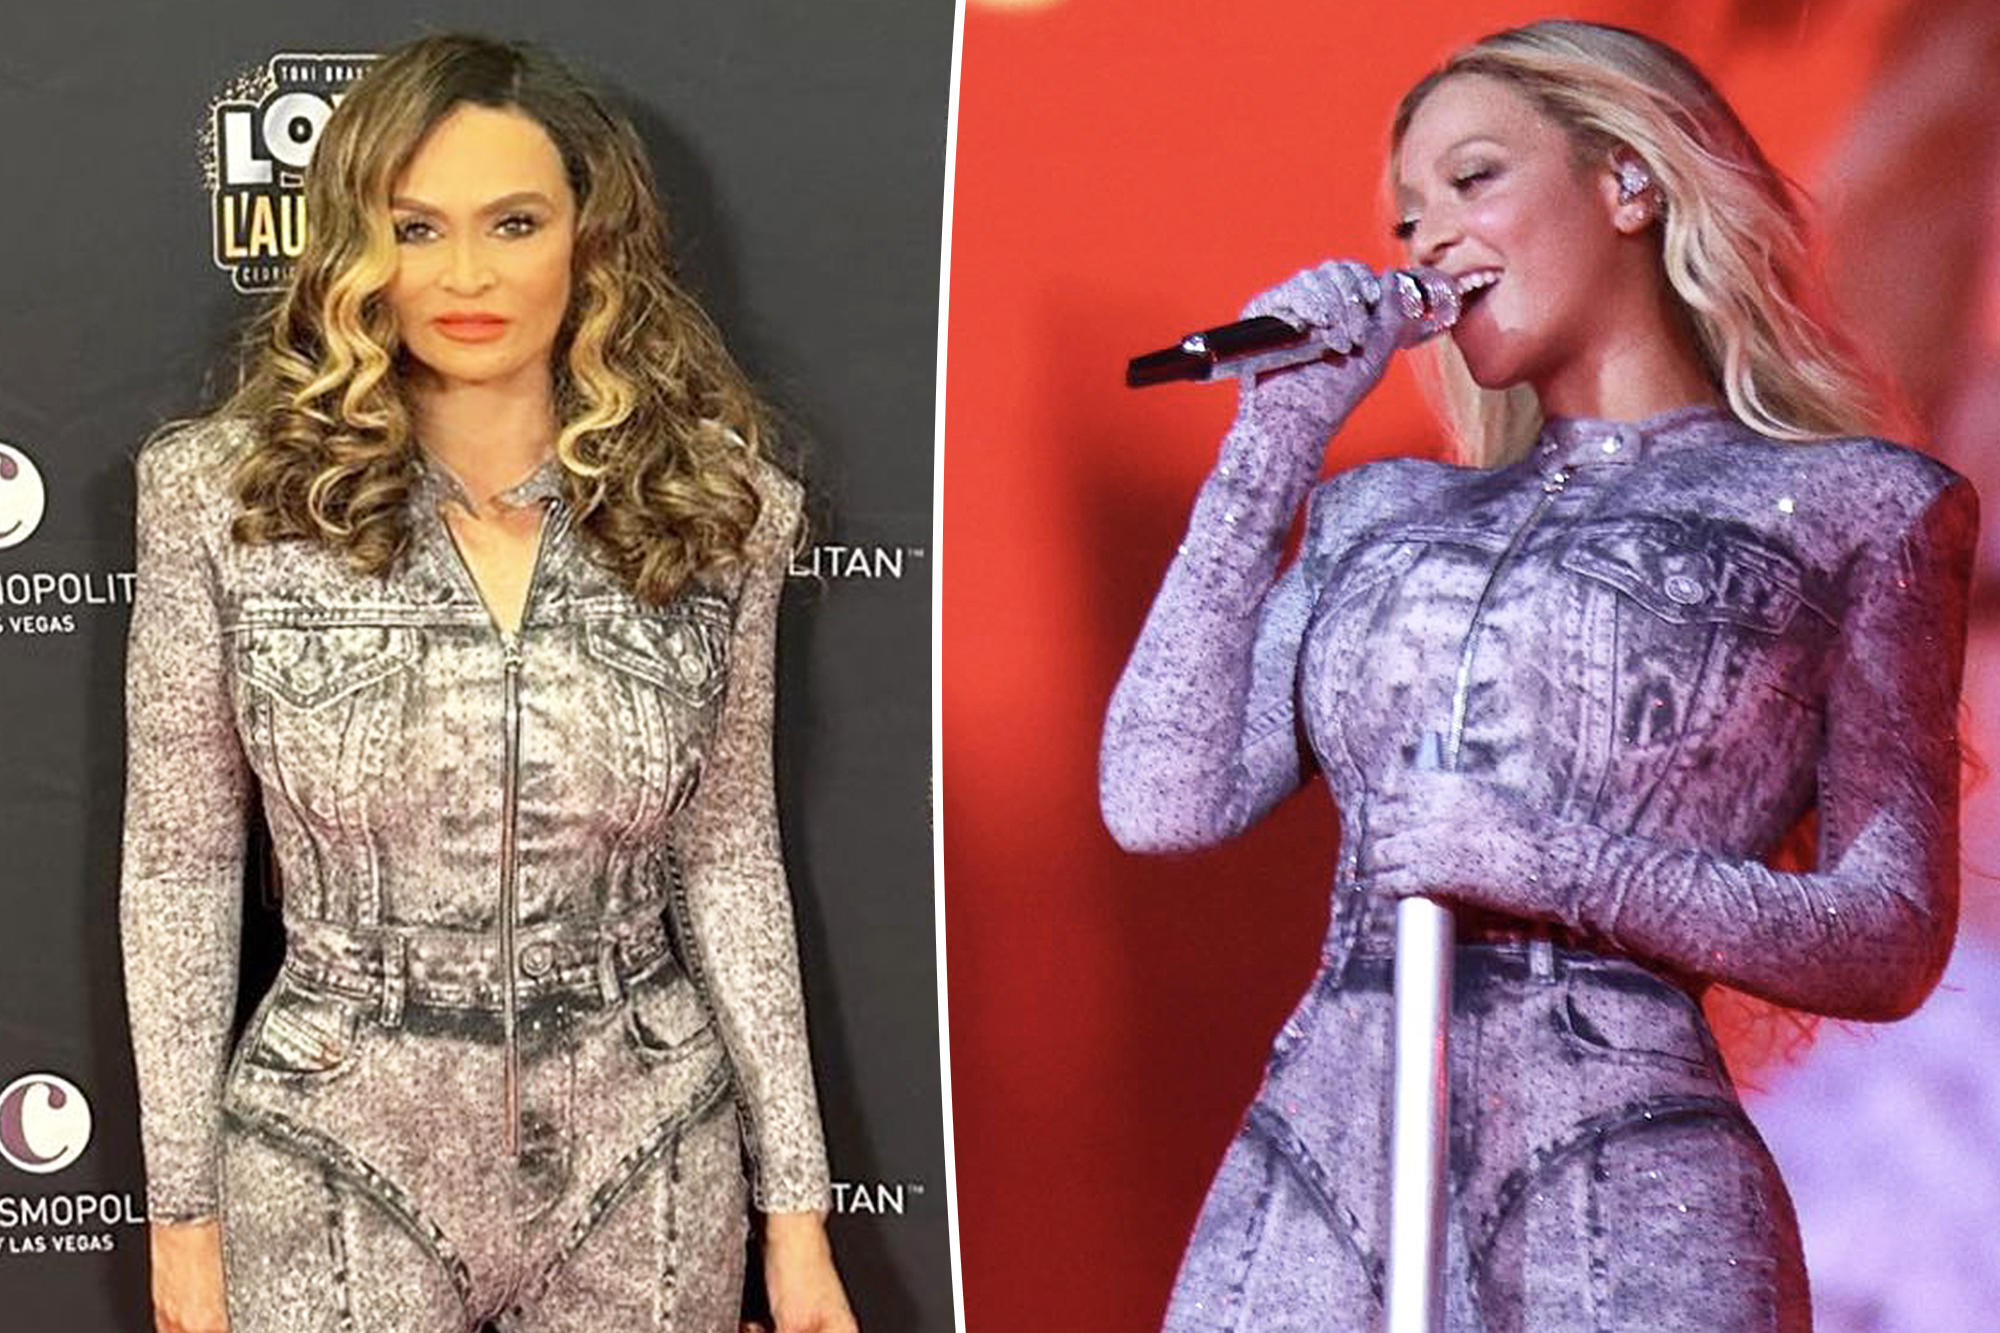 Tina Knowles borrows one of daughter Beyoncé’s Renaissance Tour outfits for red carpet event